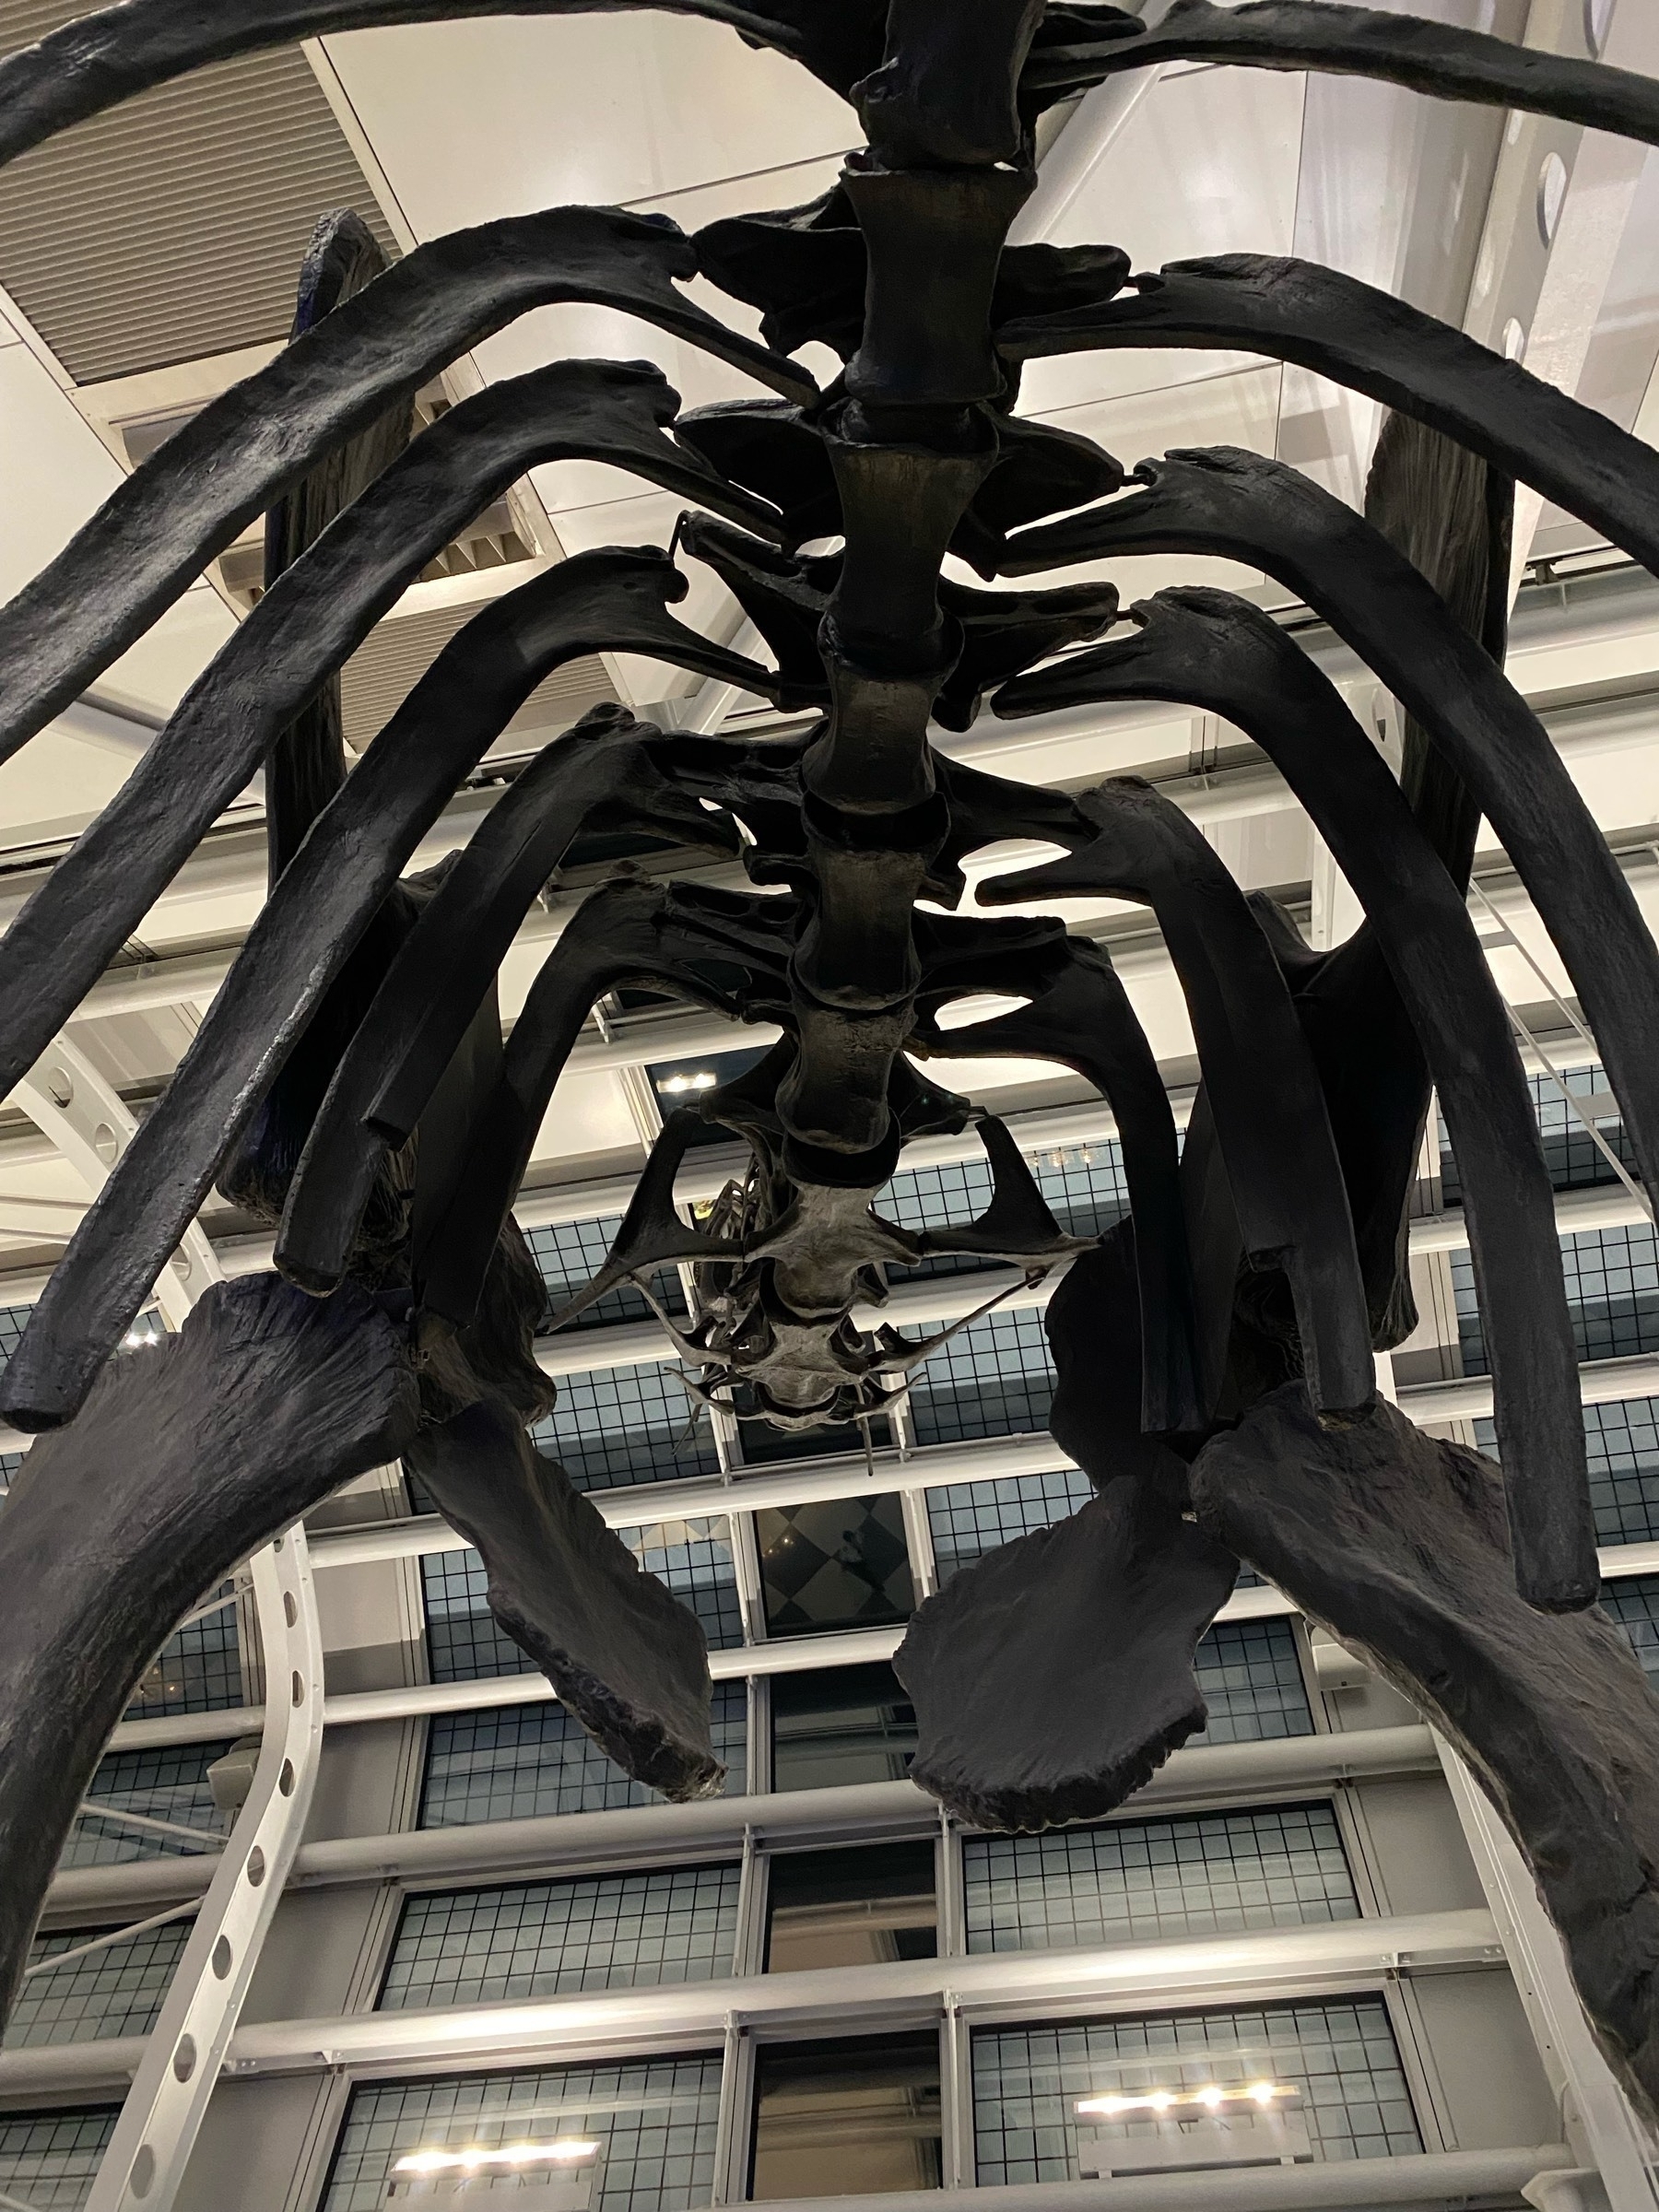 View from below of a brachiosaurus replica fossil skeleton, mostly ribs.